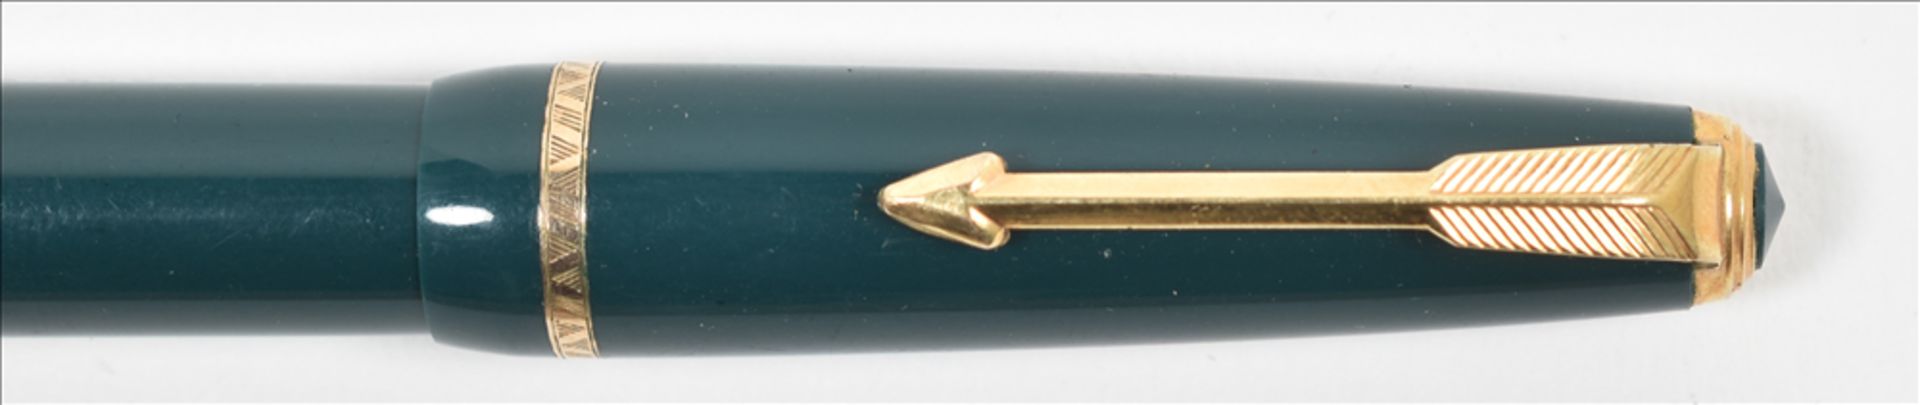 [Fountain pens] Collection of five Parker fountain pens with gold nibs - Image 4 of 9